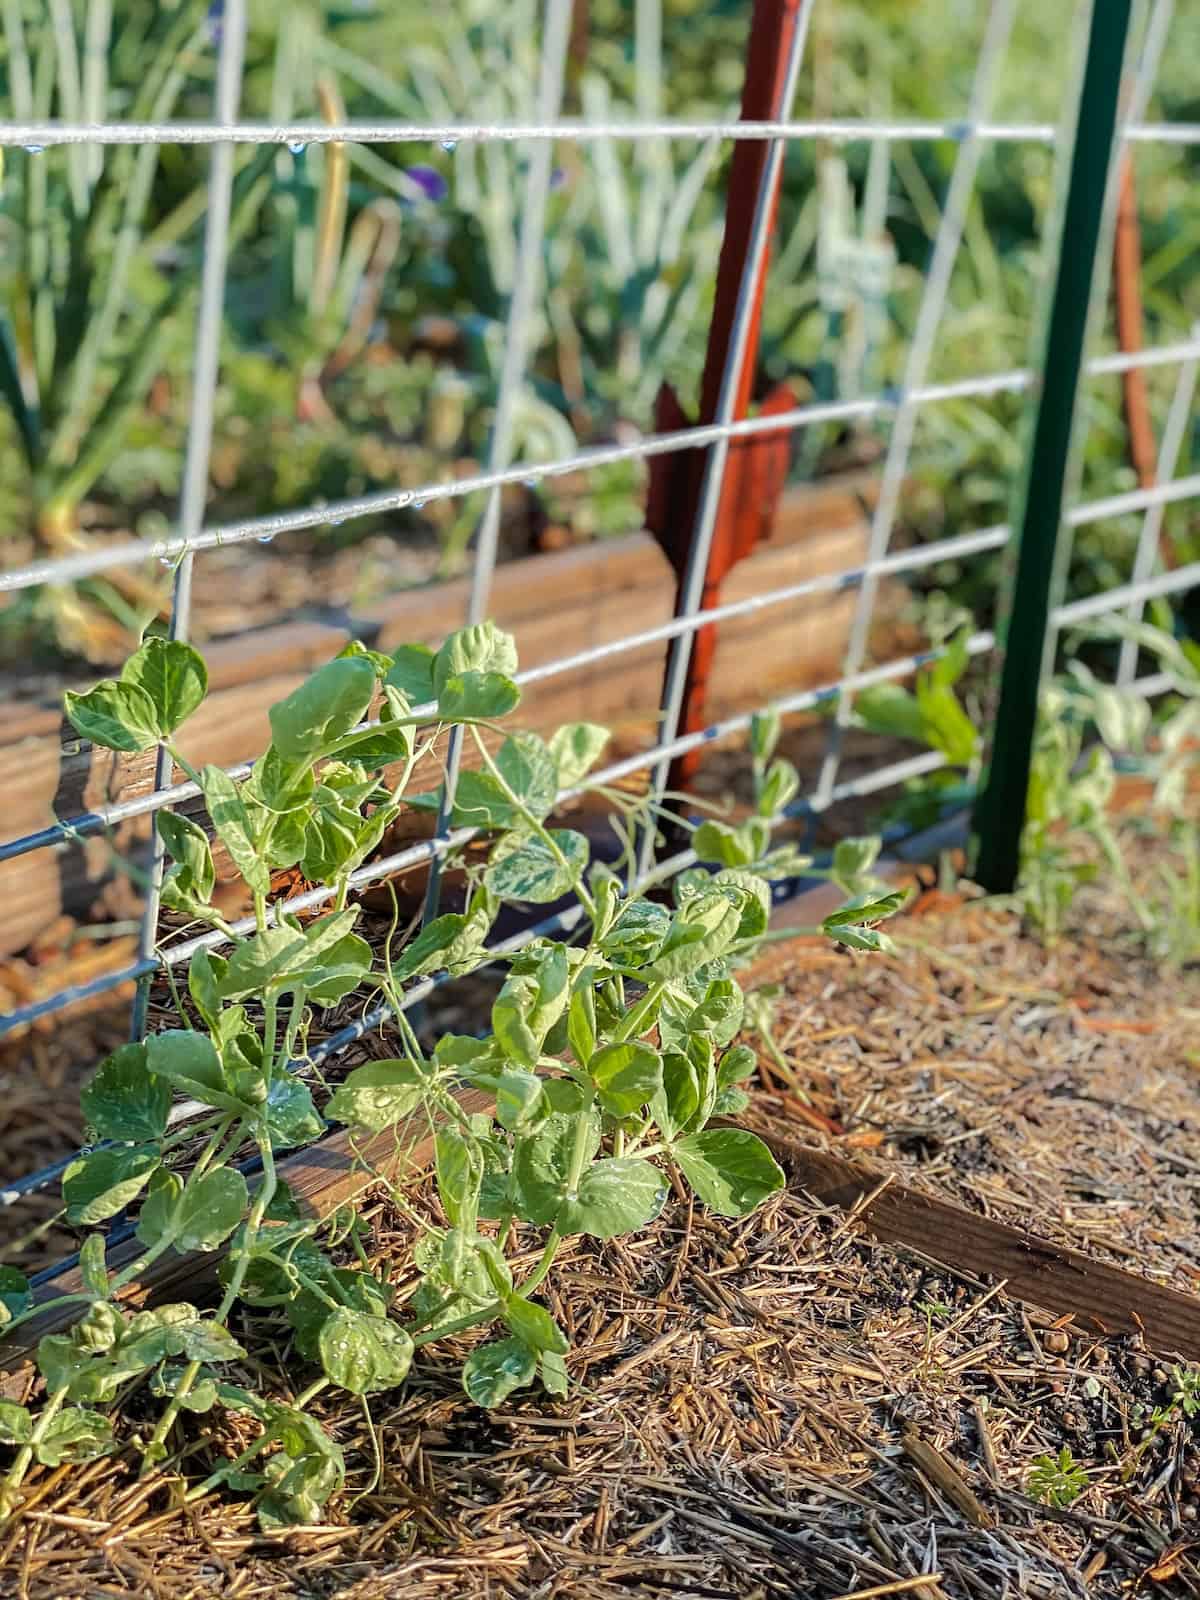 vertically growing sweet peas in the garden on cattle panels